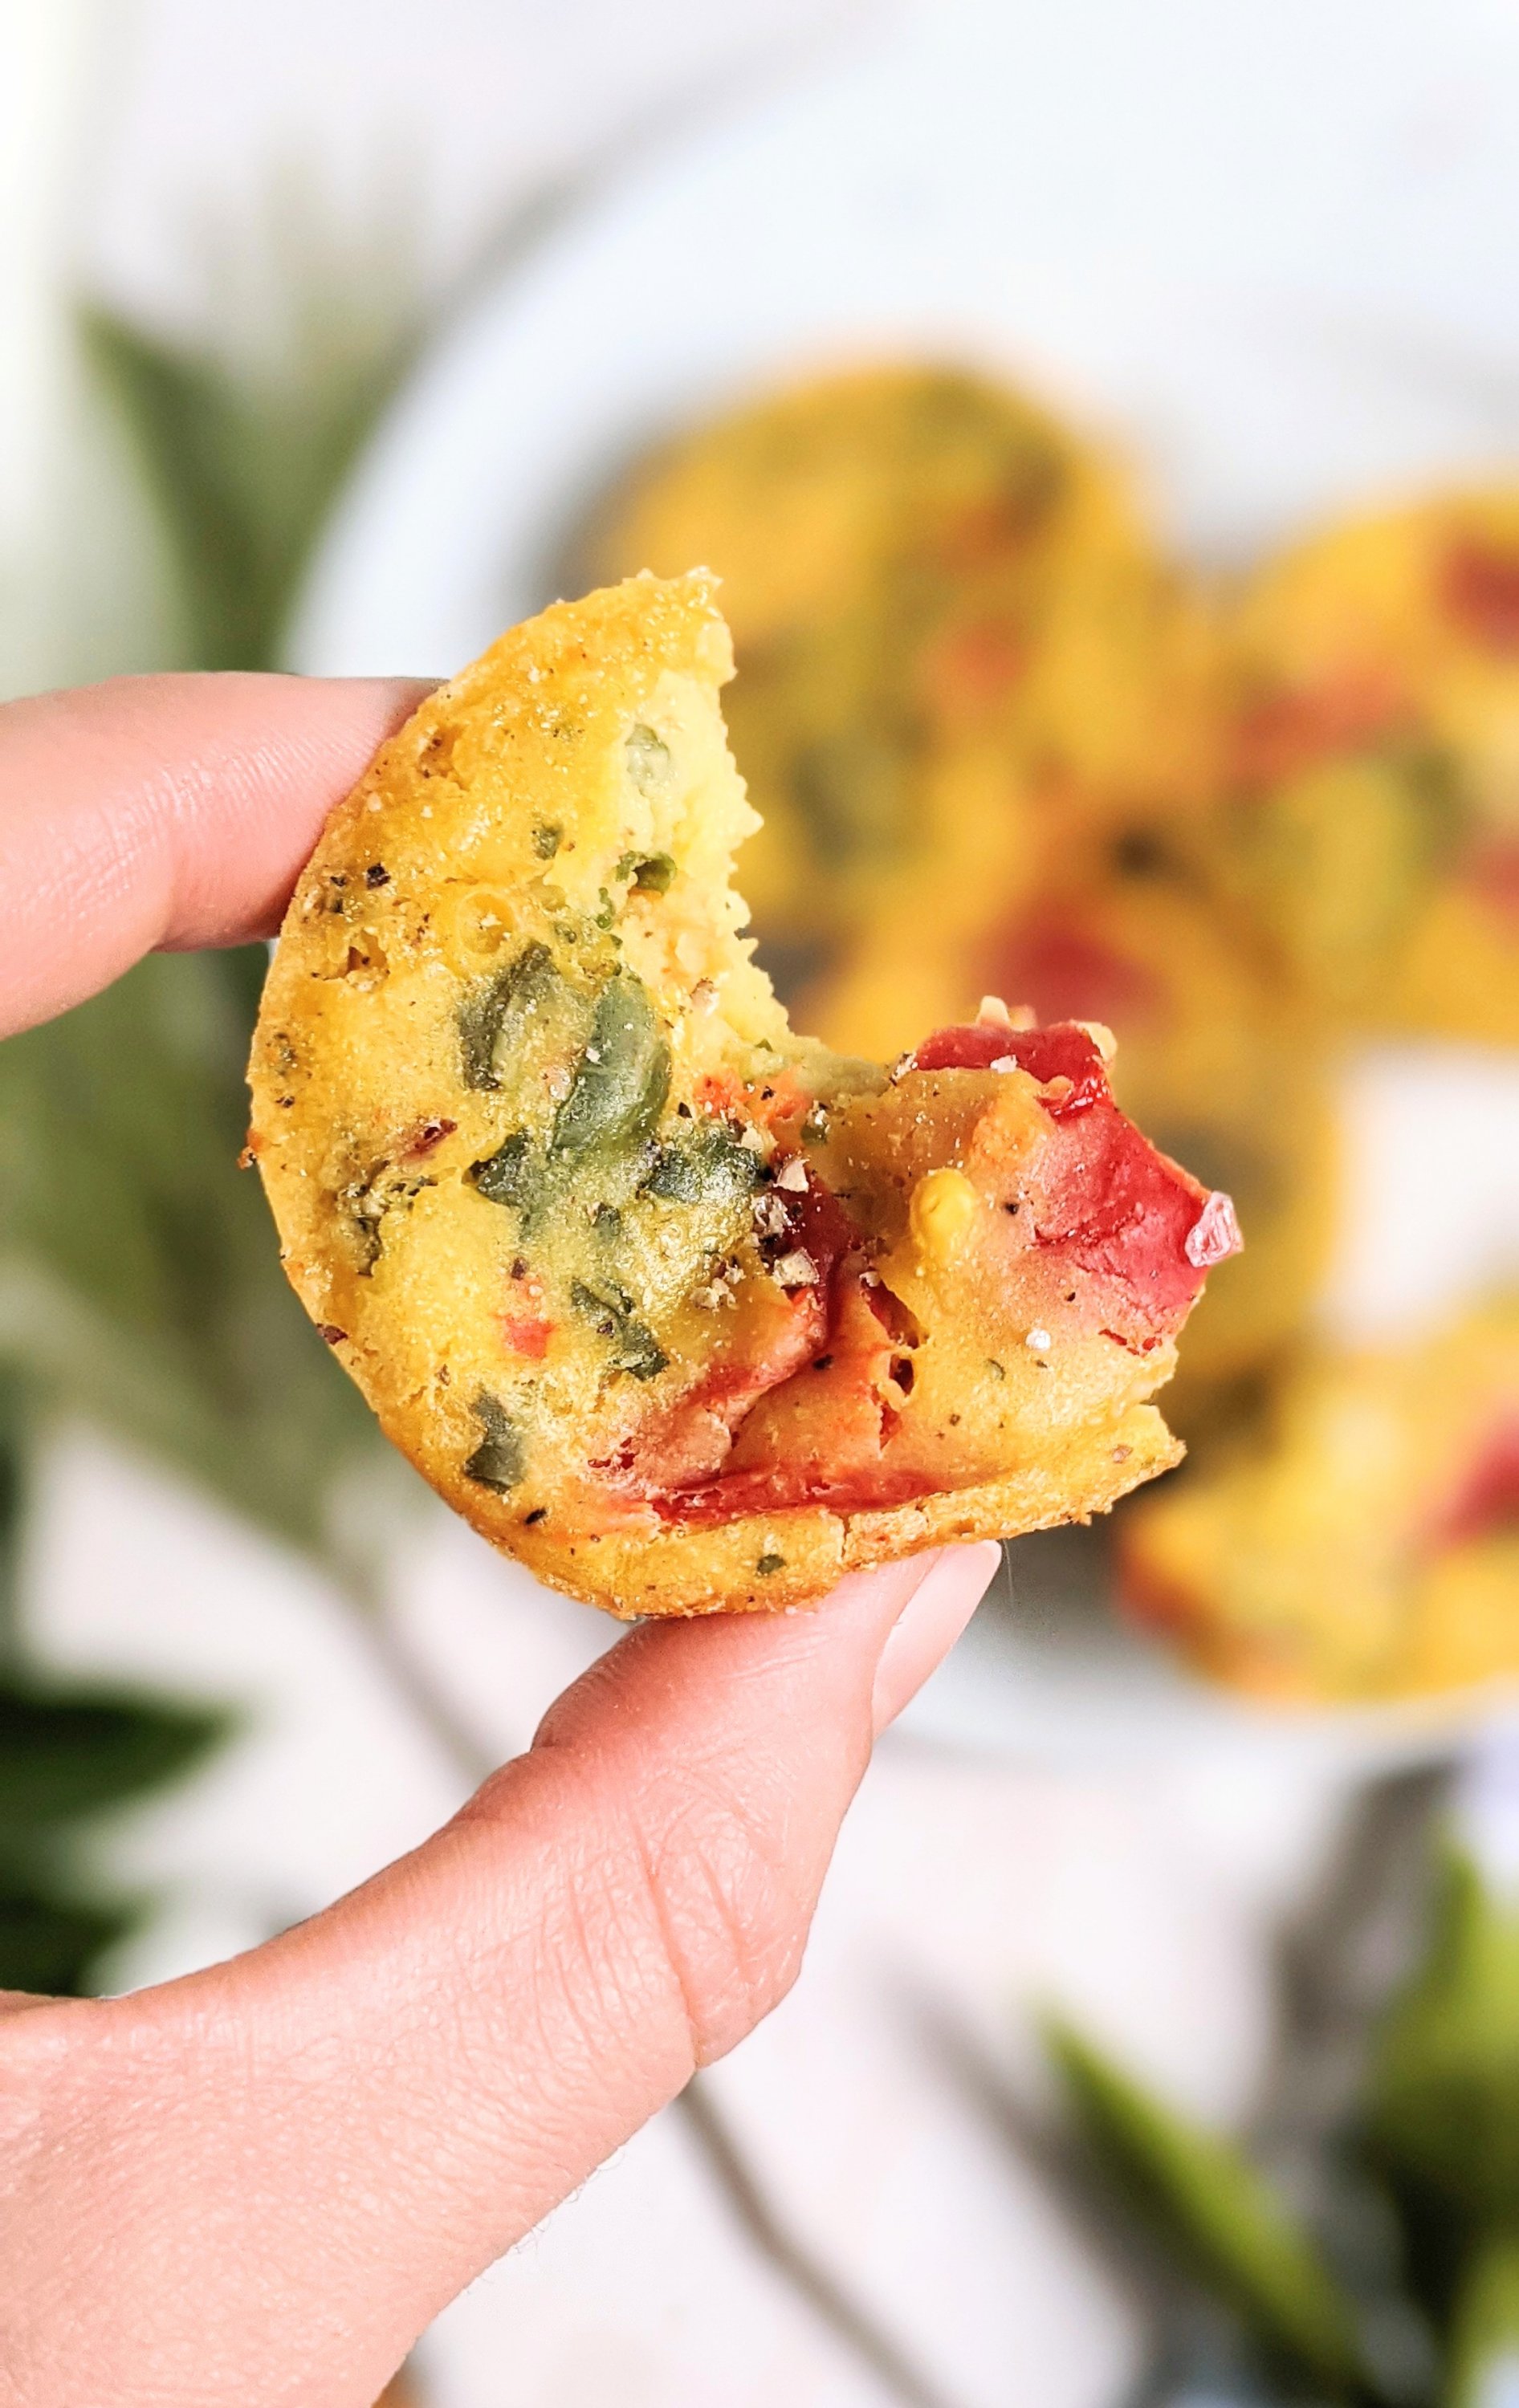 savory vegan muffins with roasted red pepper and kale healthy gluten free vegetarian veganuary meatless breakfast and brunch ideas for a crowd make ahead and meal prep friendly